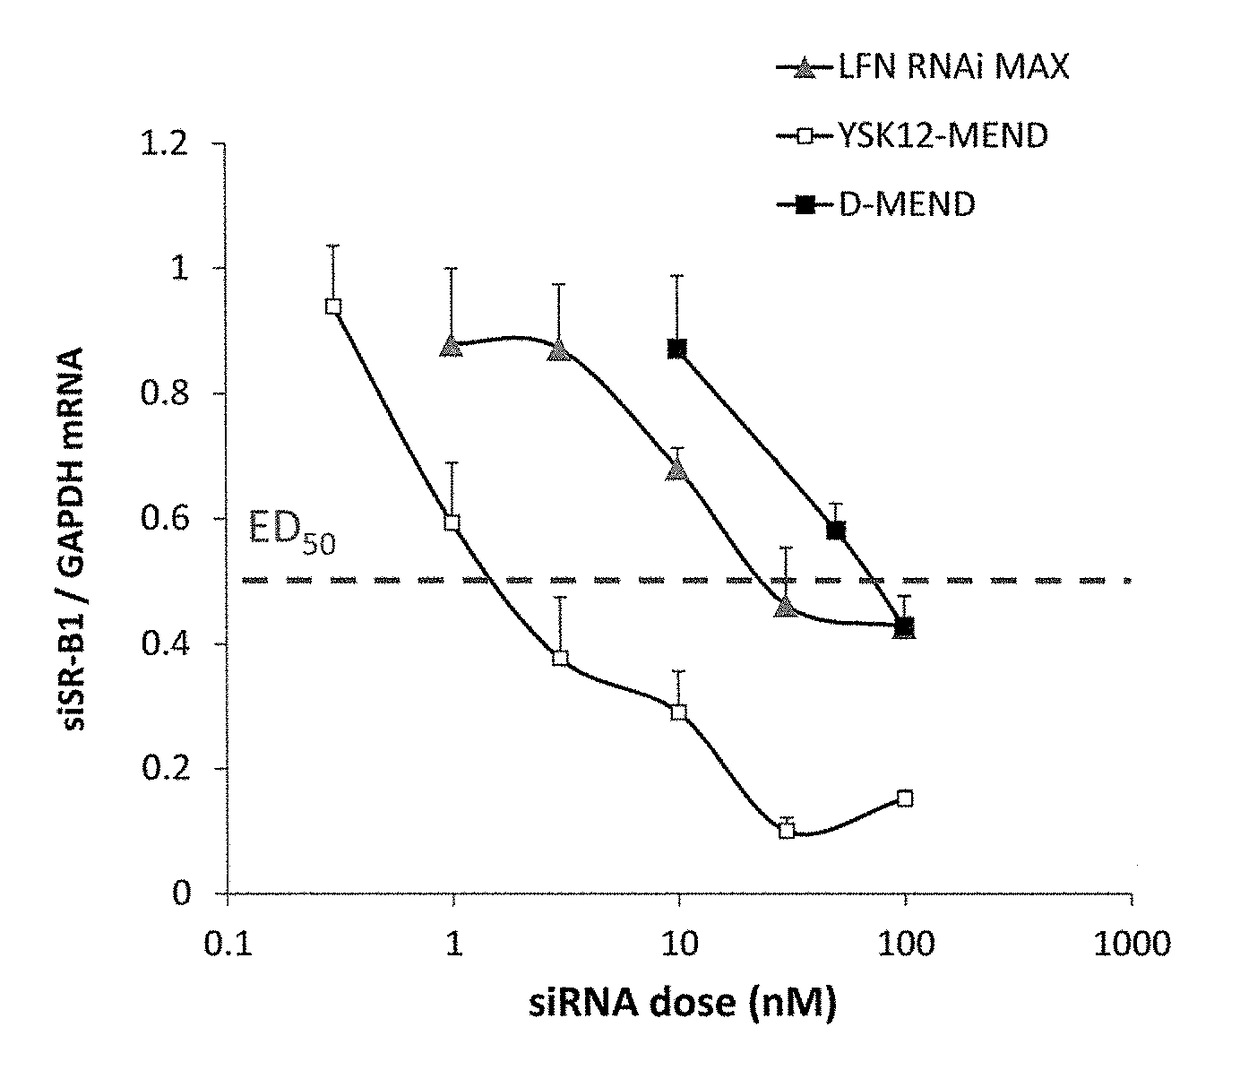 LIPID MEMBRANE STRUCTURE FOR siRNA INTRACELLULAR DELIVERY